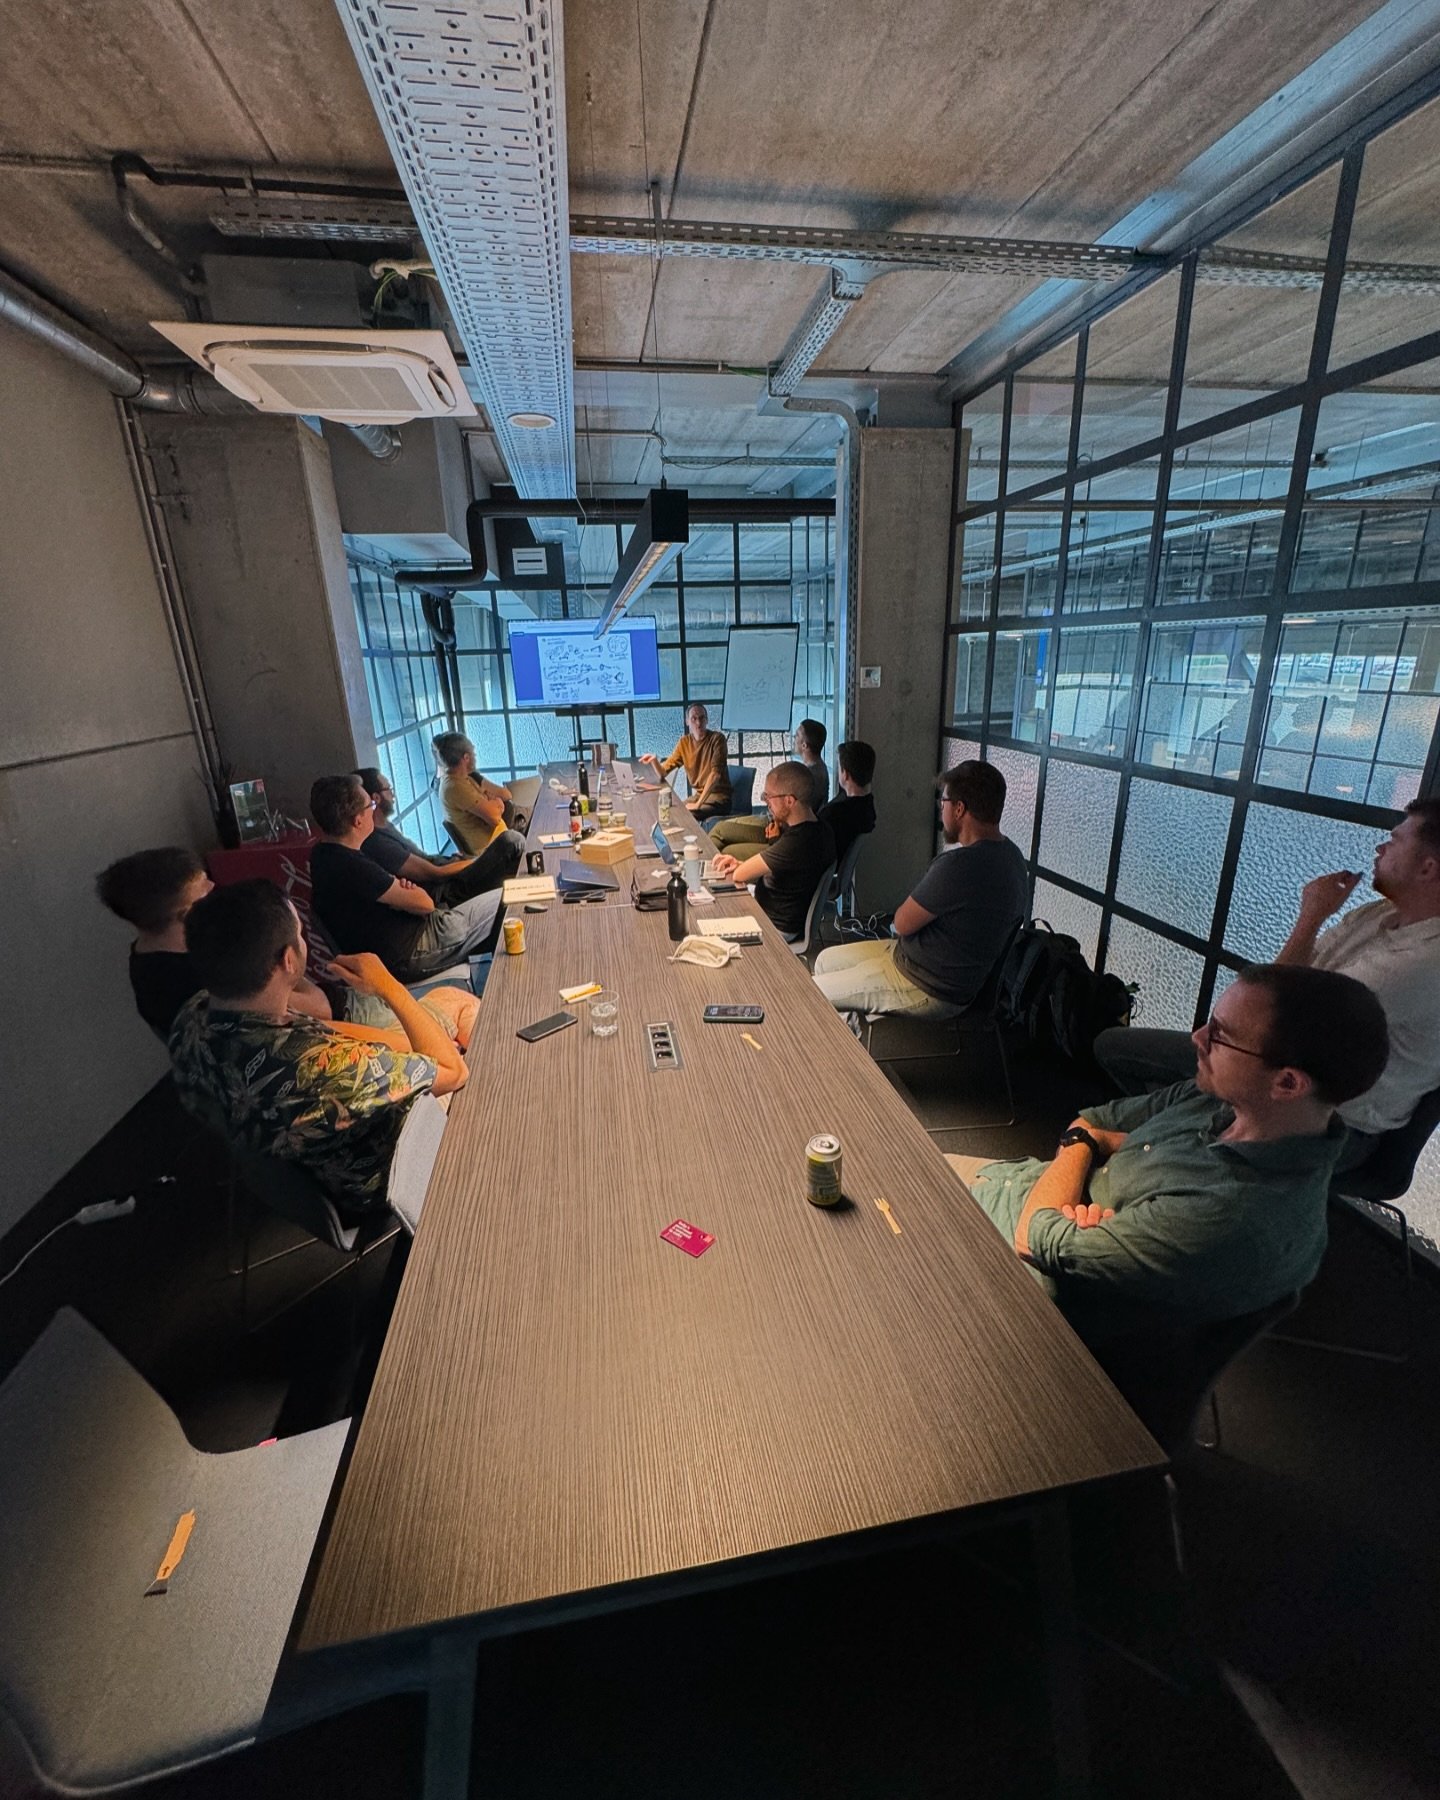 &ldquo;Programming is a creative&nbsp;act&rdquo; fun workshop yesterday! 

Yesterday&rsquo;s workshop for the team involved learning the processes and habits of highly creative individuals and discovering how to incorporate creativity into our progra